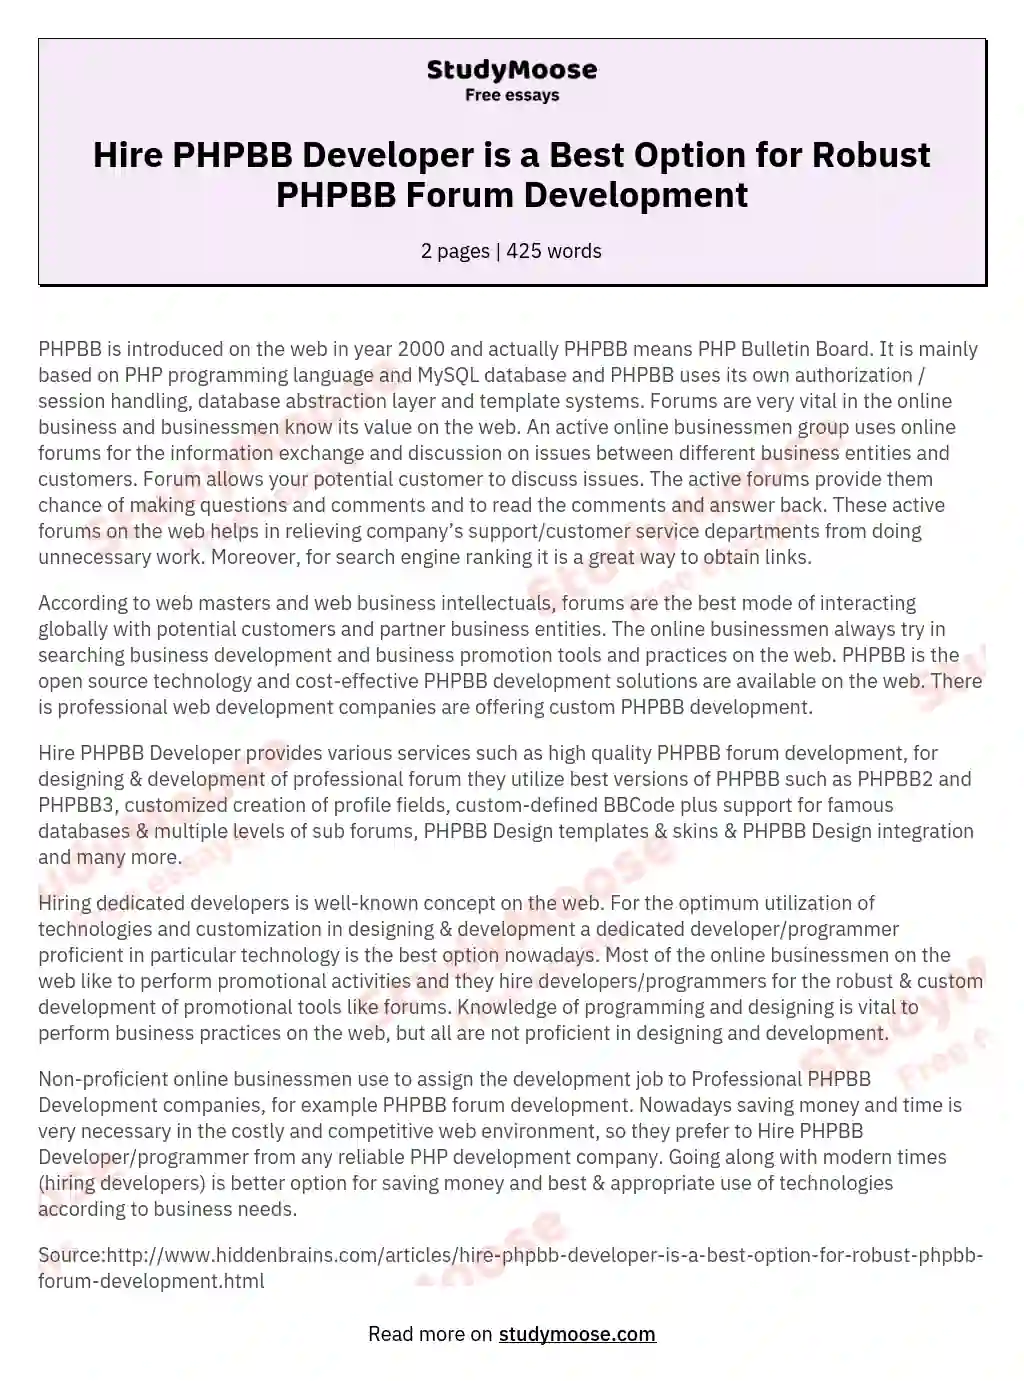 Hire PHPBB Developer is a Best Option for Robust PHPBB Forum Development